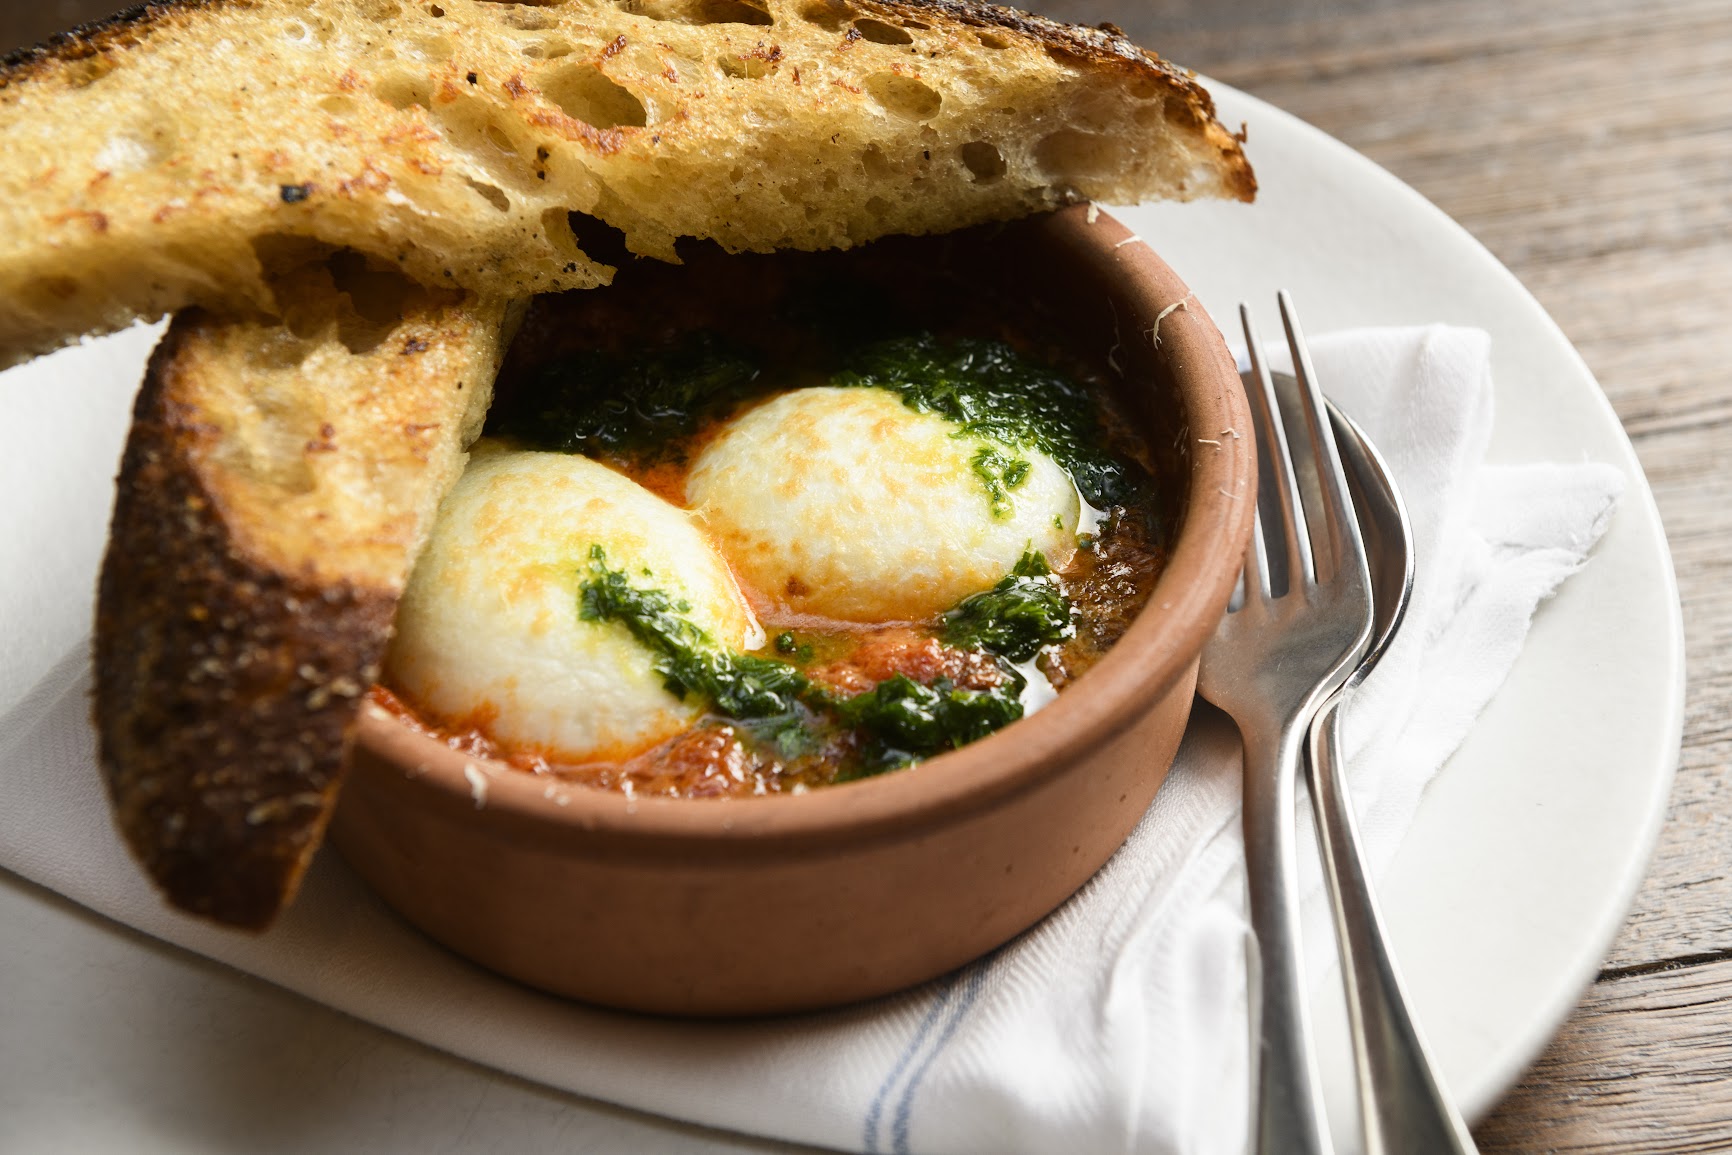 Baked eggs, spicy pomodoro, guanciale, pecorino and garlic bread … oh my!